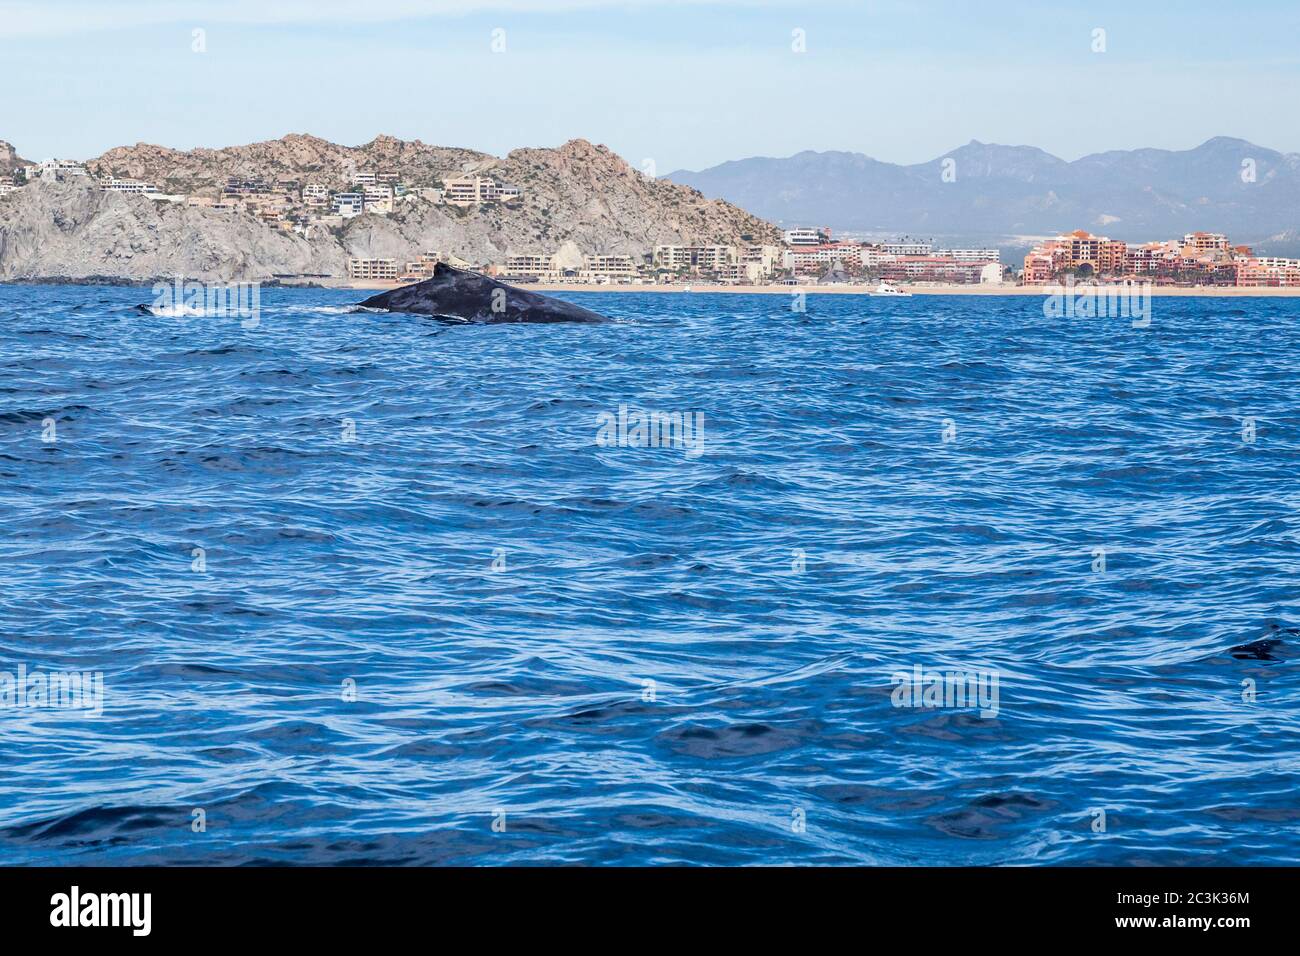 A Humpback Whale surfaces off the coast of Cabo San Lucas, BCS, Mexico. Stock Photo